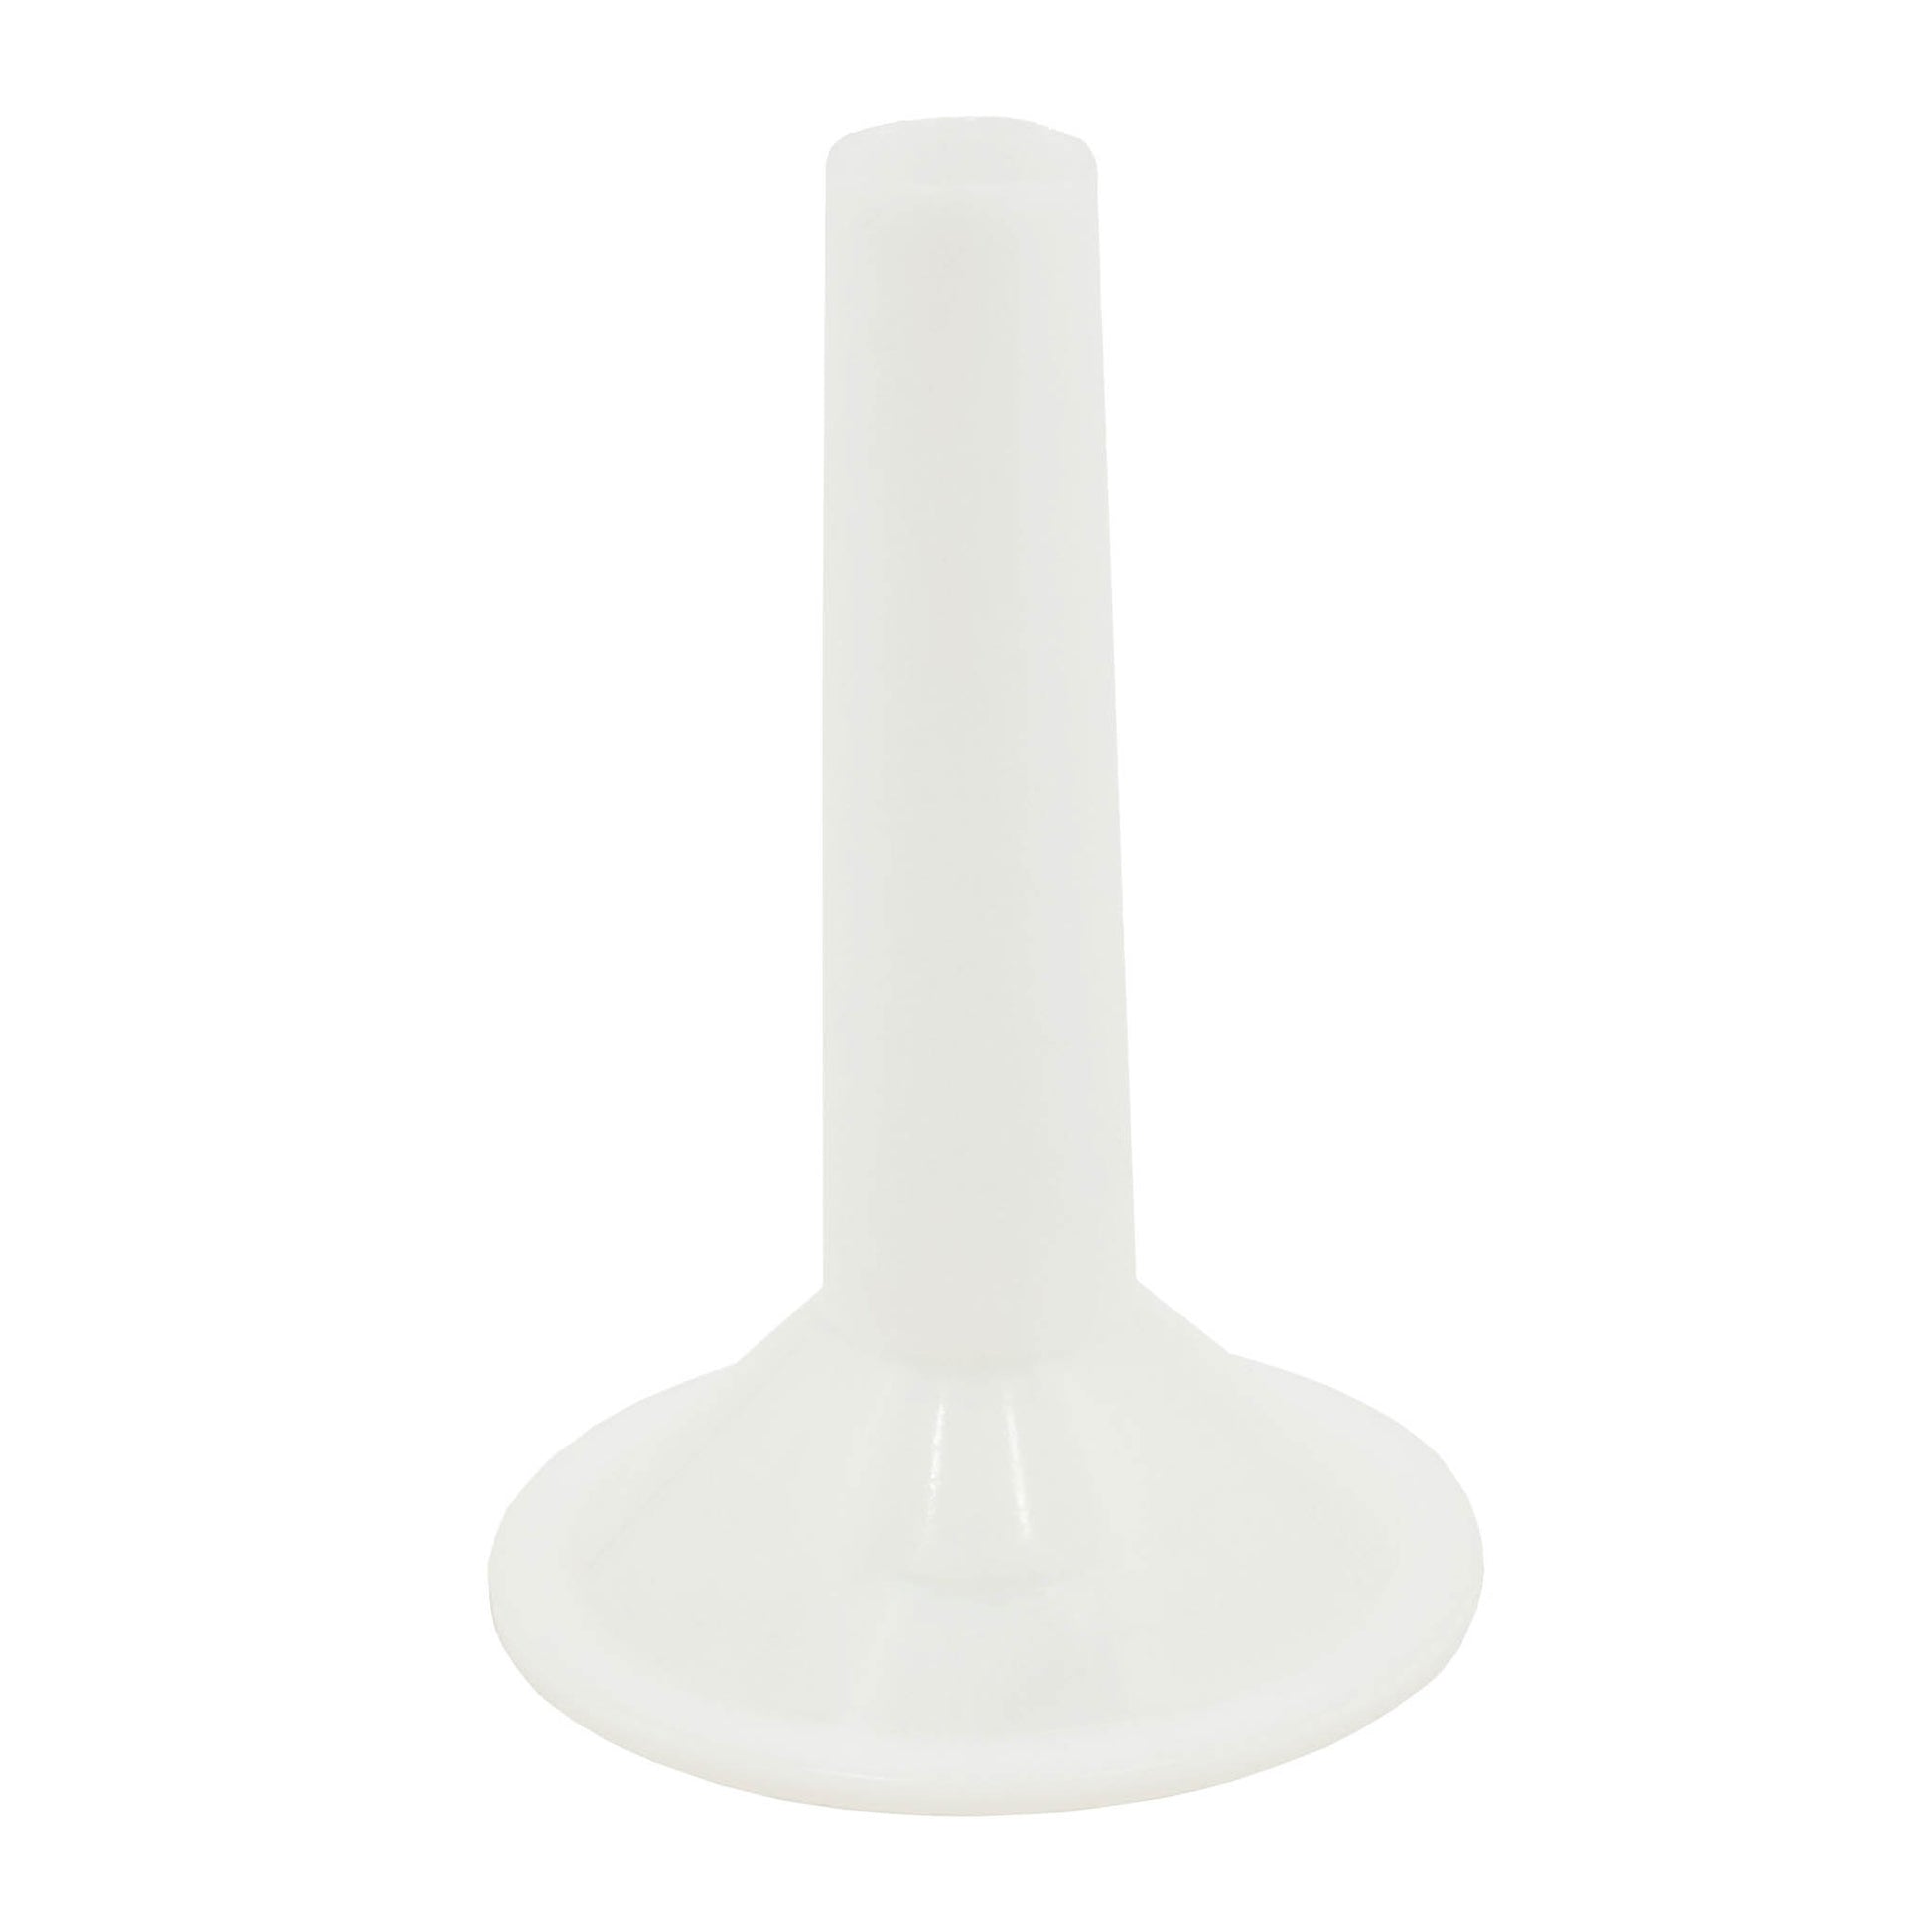 white food grade plastic salami and sausage mincer funnel for size 22 mincers 30mm in diameter.